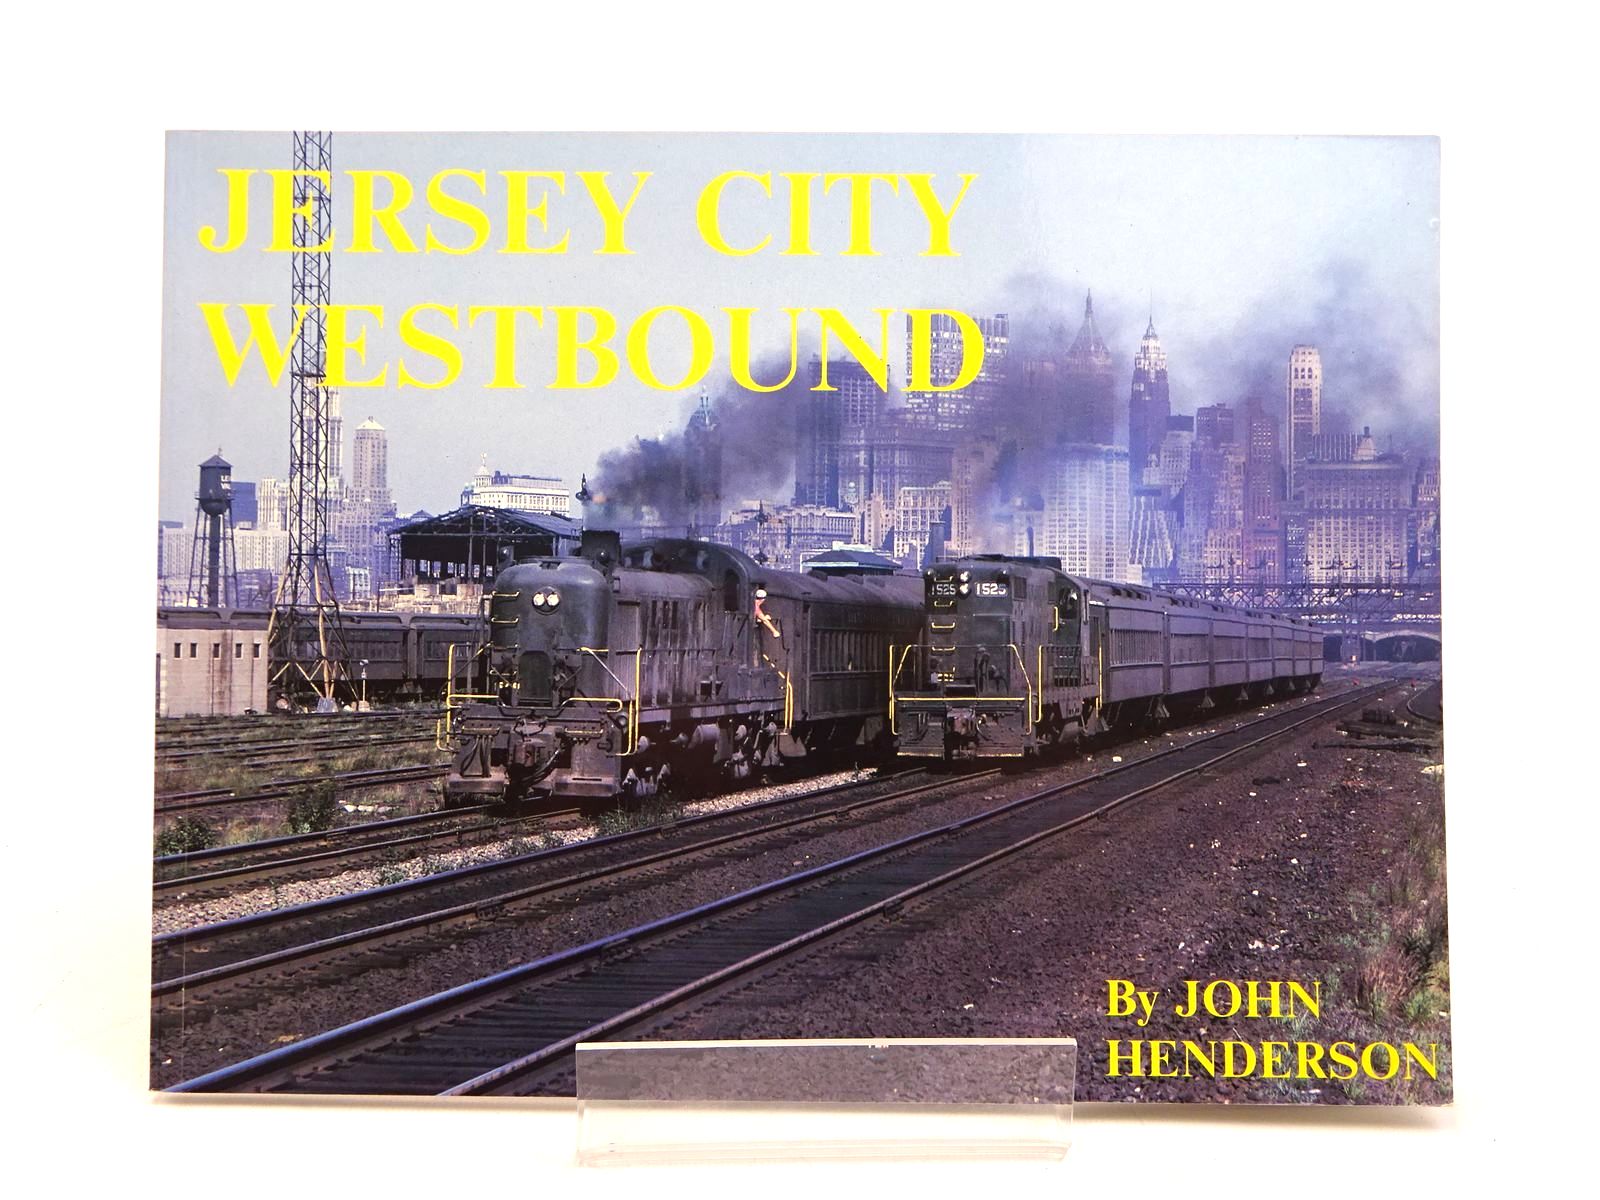 Photo of JERSEY CITY WESTBOUND written by Henderson, John published by H&amp;m Productions (STOCK CODE: 1818019)  for sale by Stella & Rose's Books